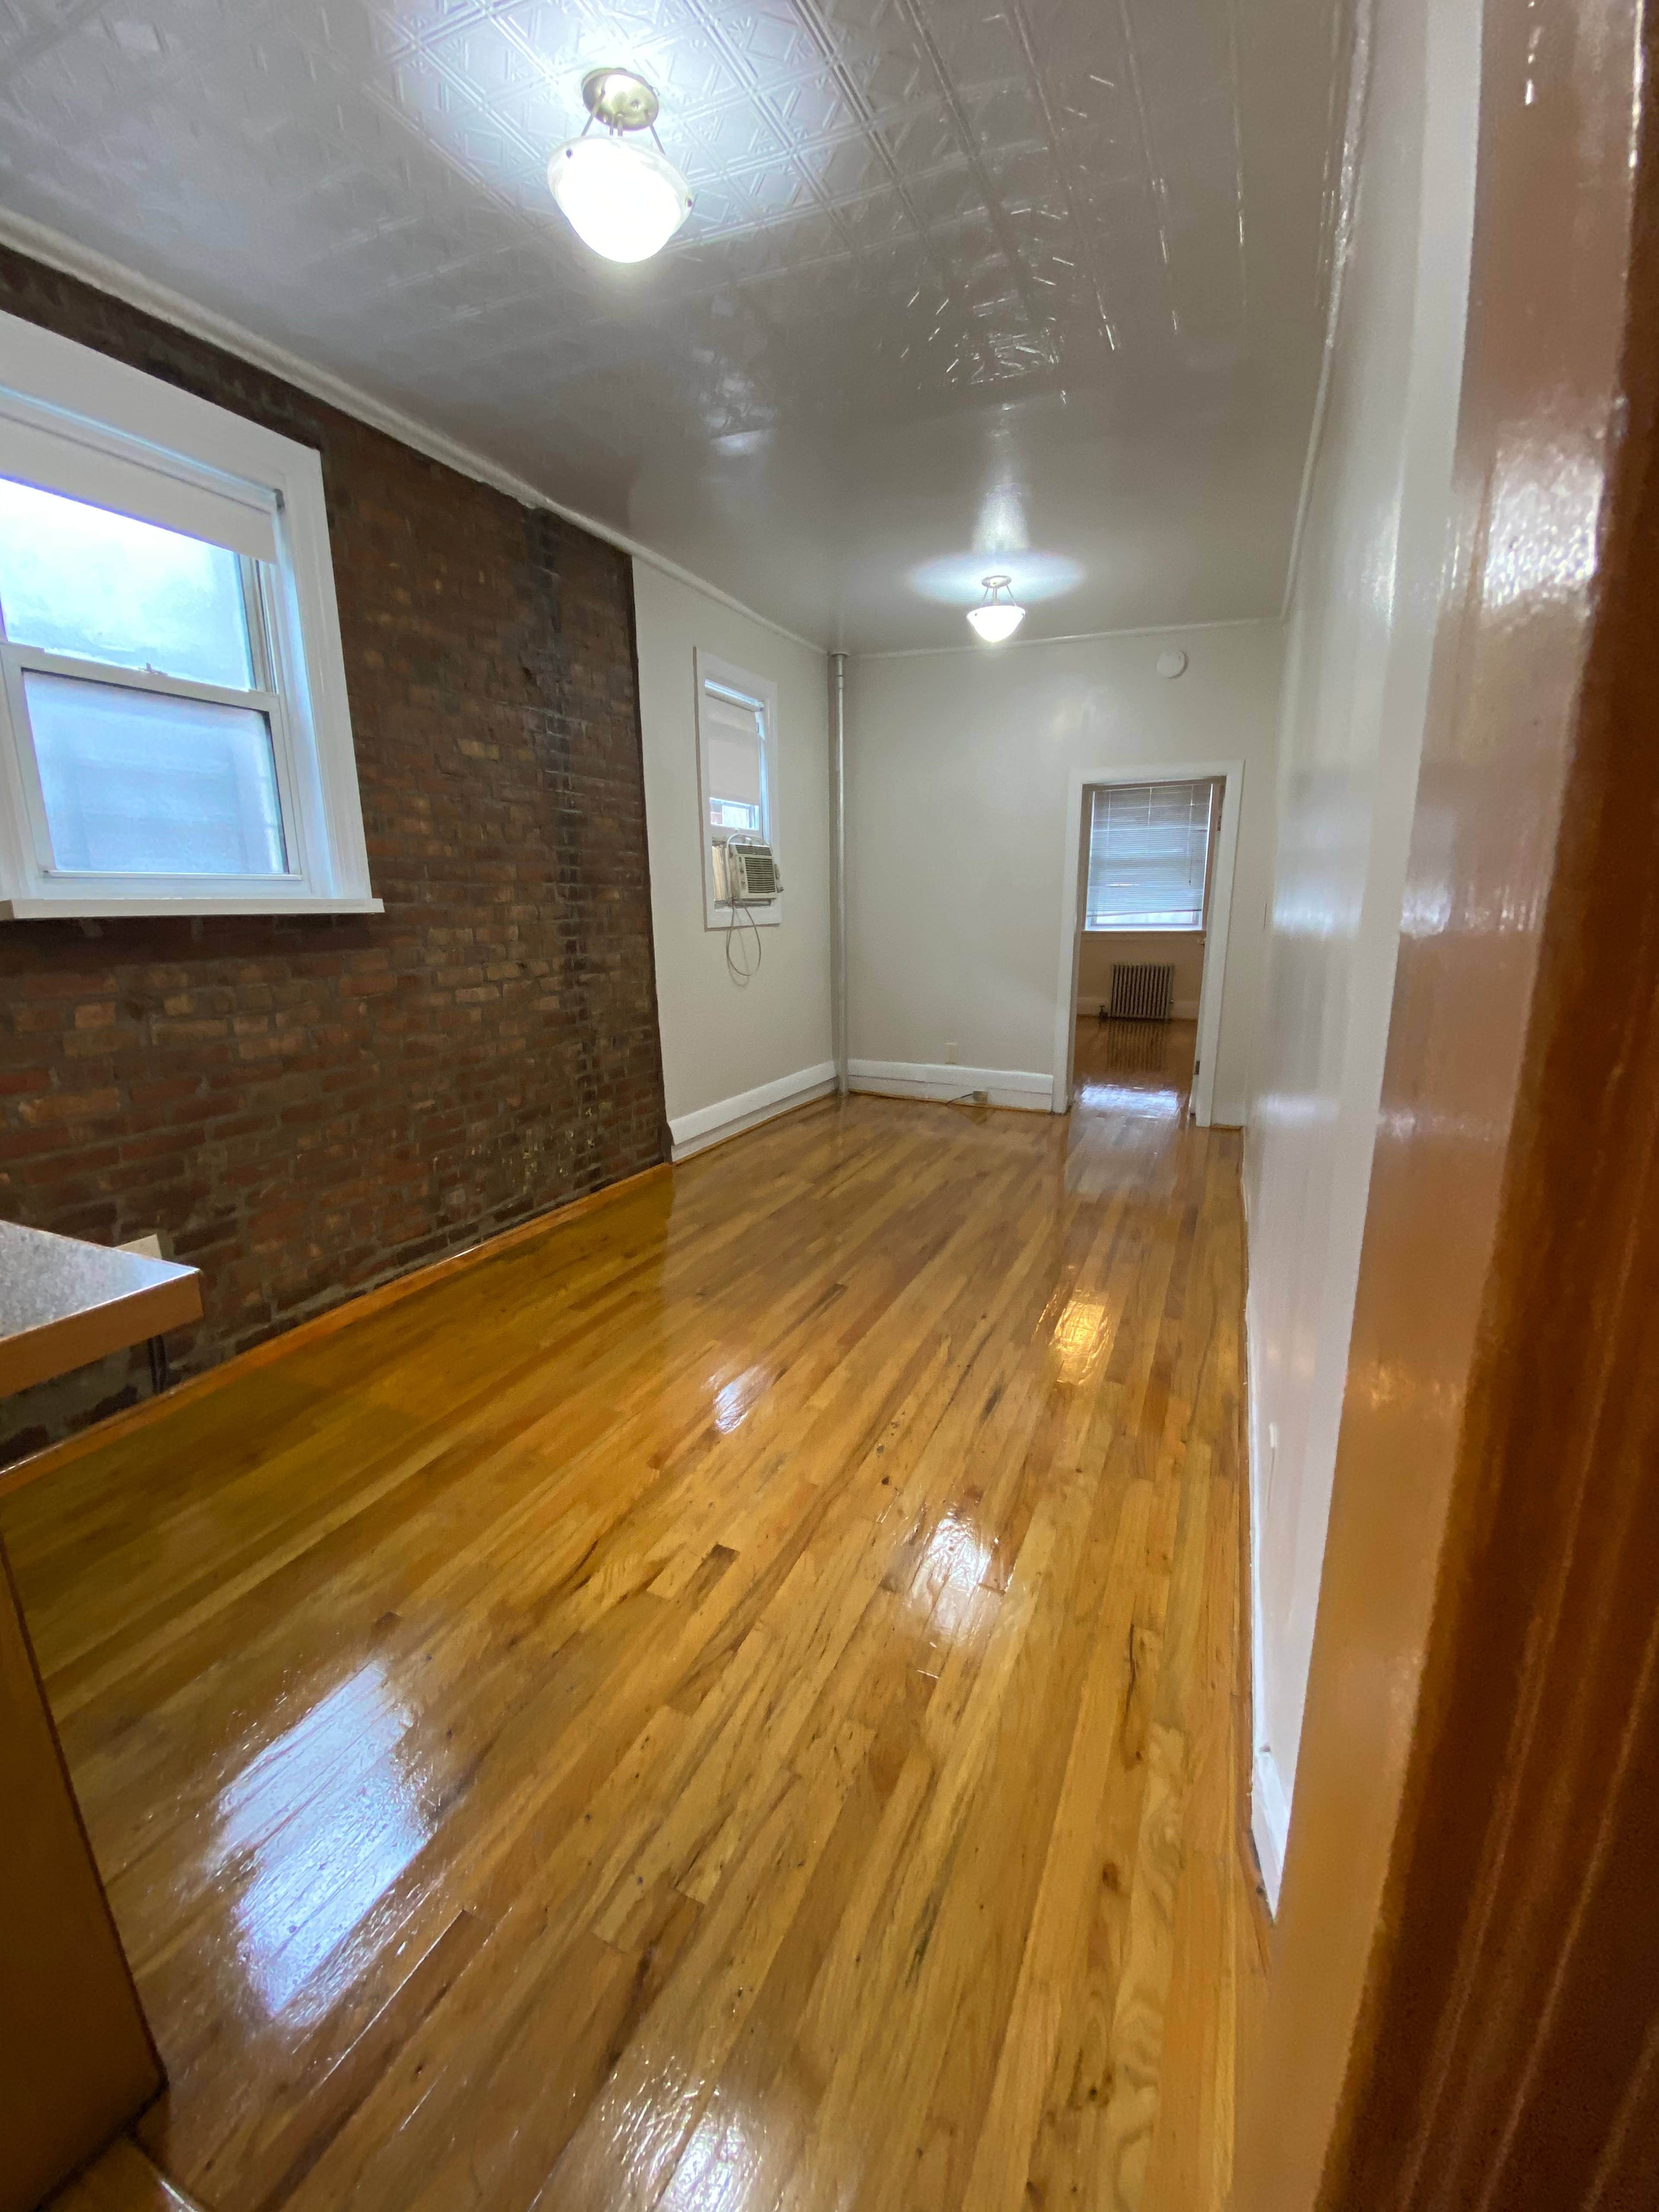 SPECIAL ONE BEDROOM NESTED RIGHT ON BERRY STREET: NORTH WILLIAMSBURG!